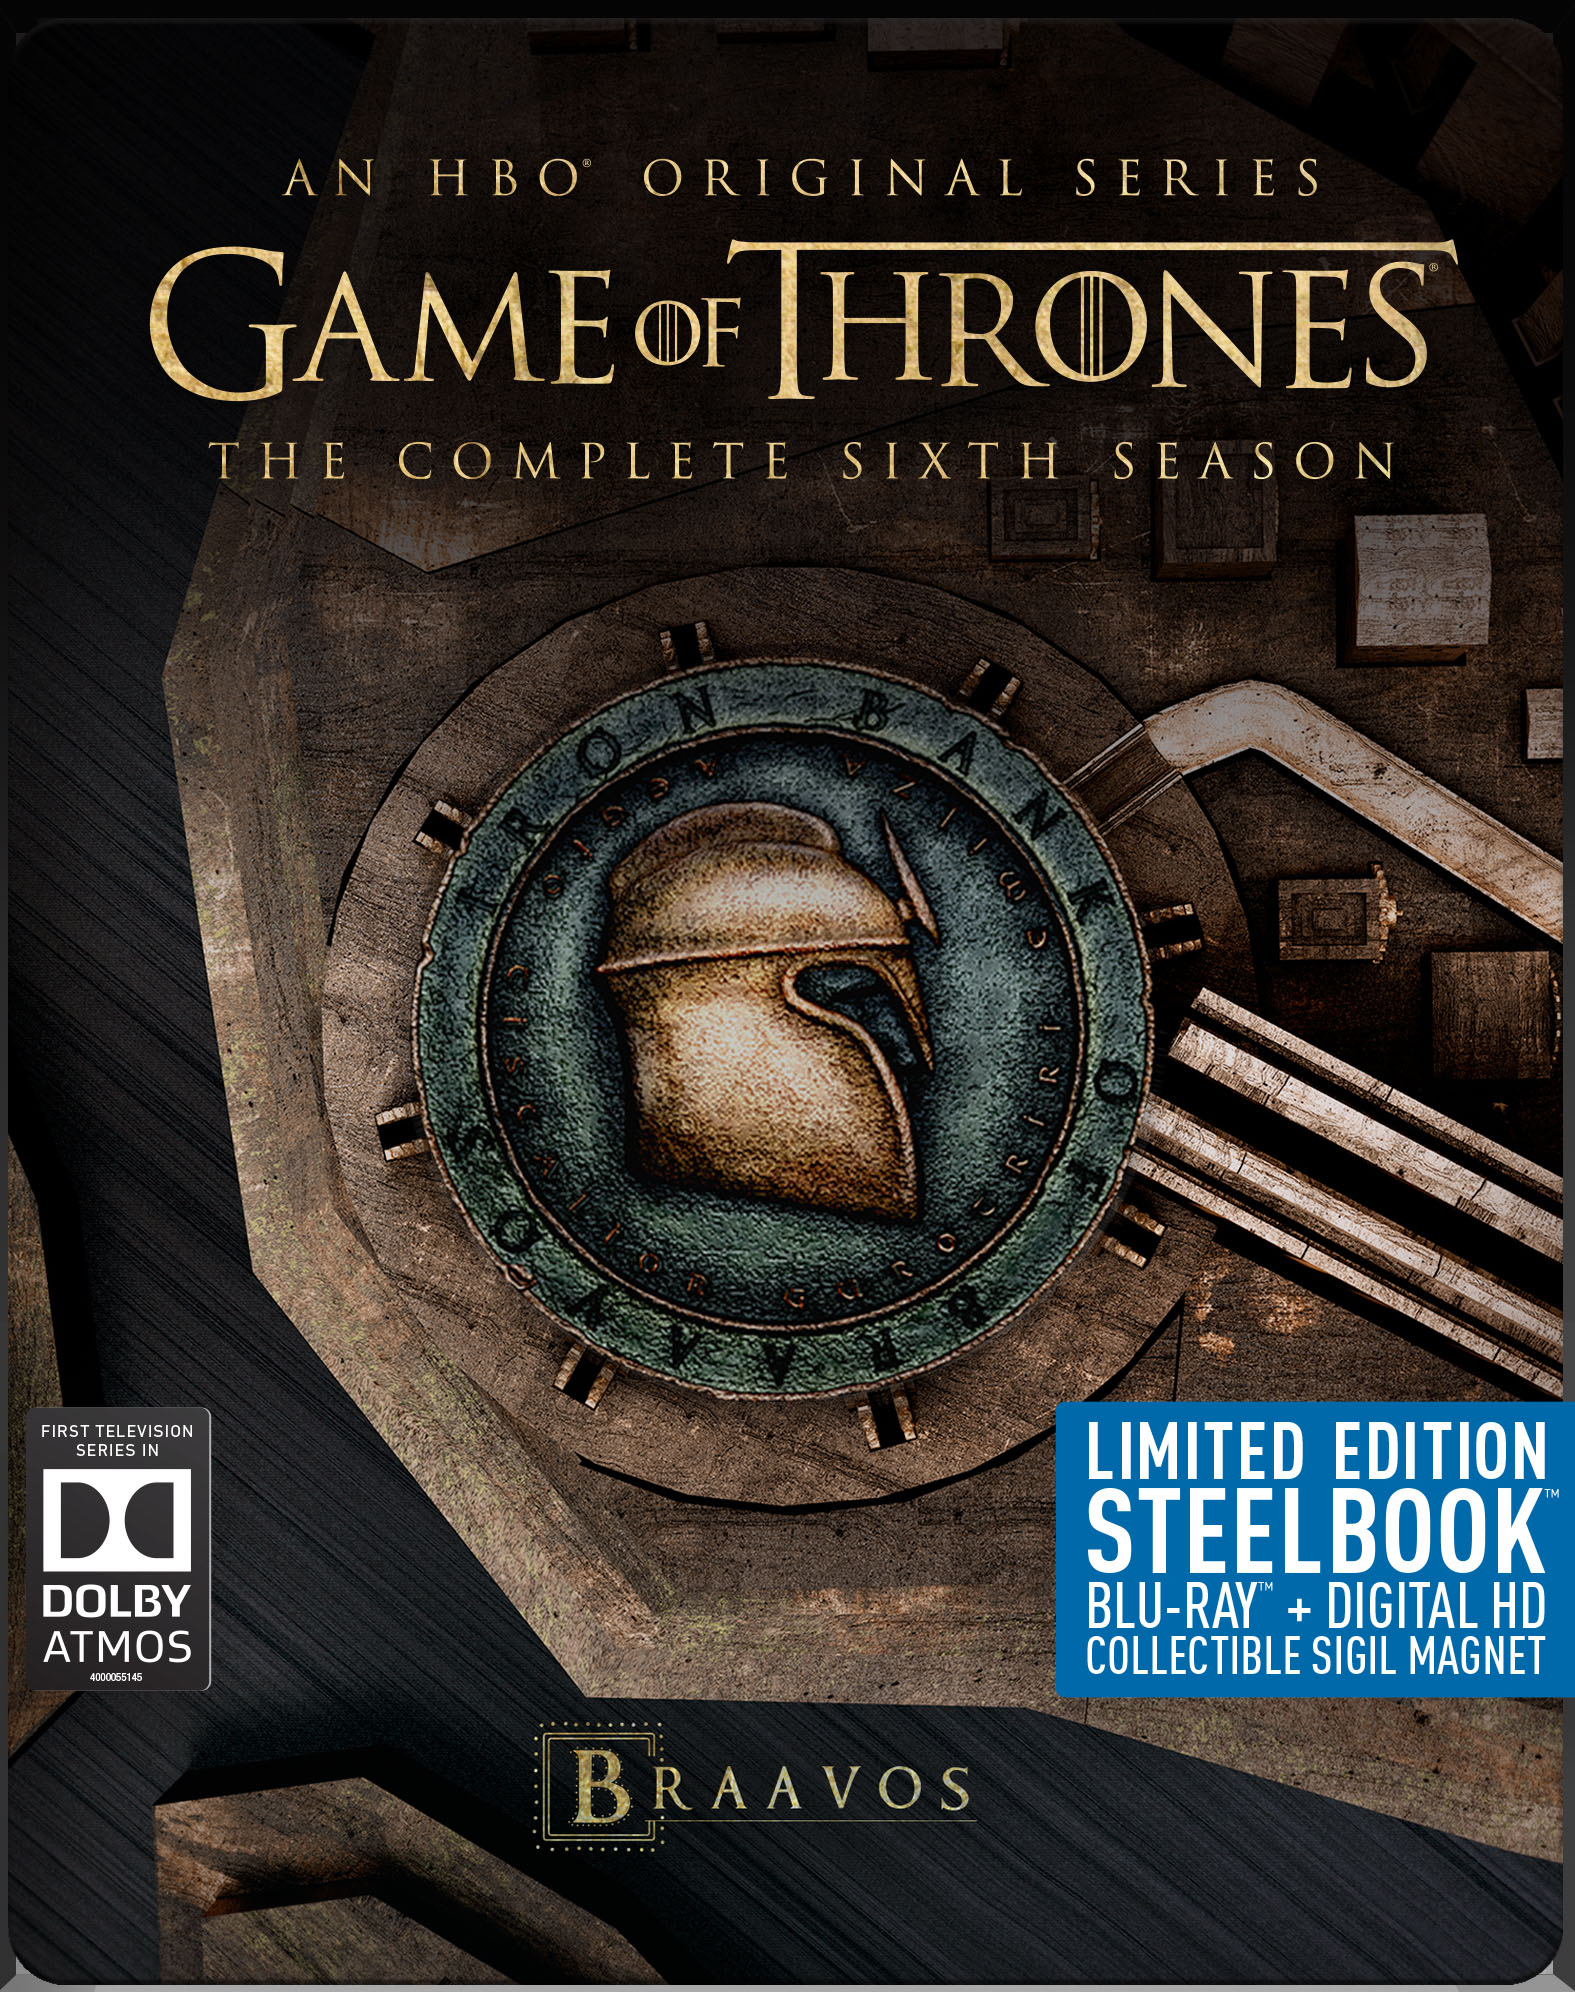 Game of Thrones: The Complete Seasons 1-8 (Collectors Edition) [Blu-ray]